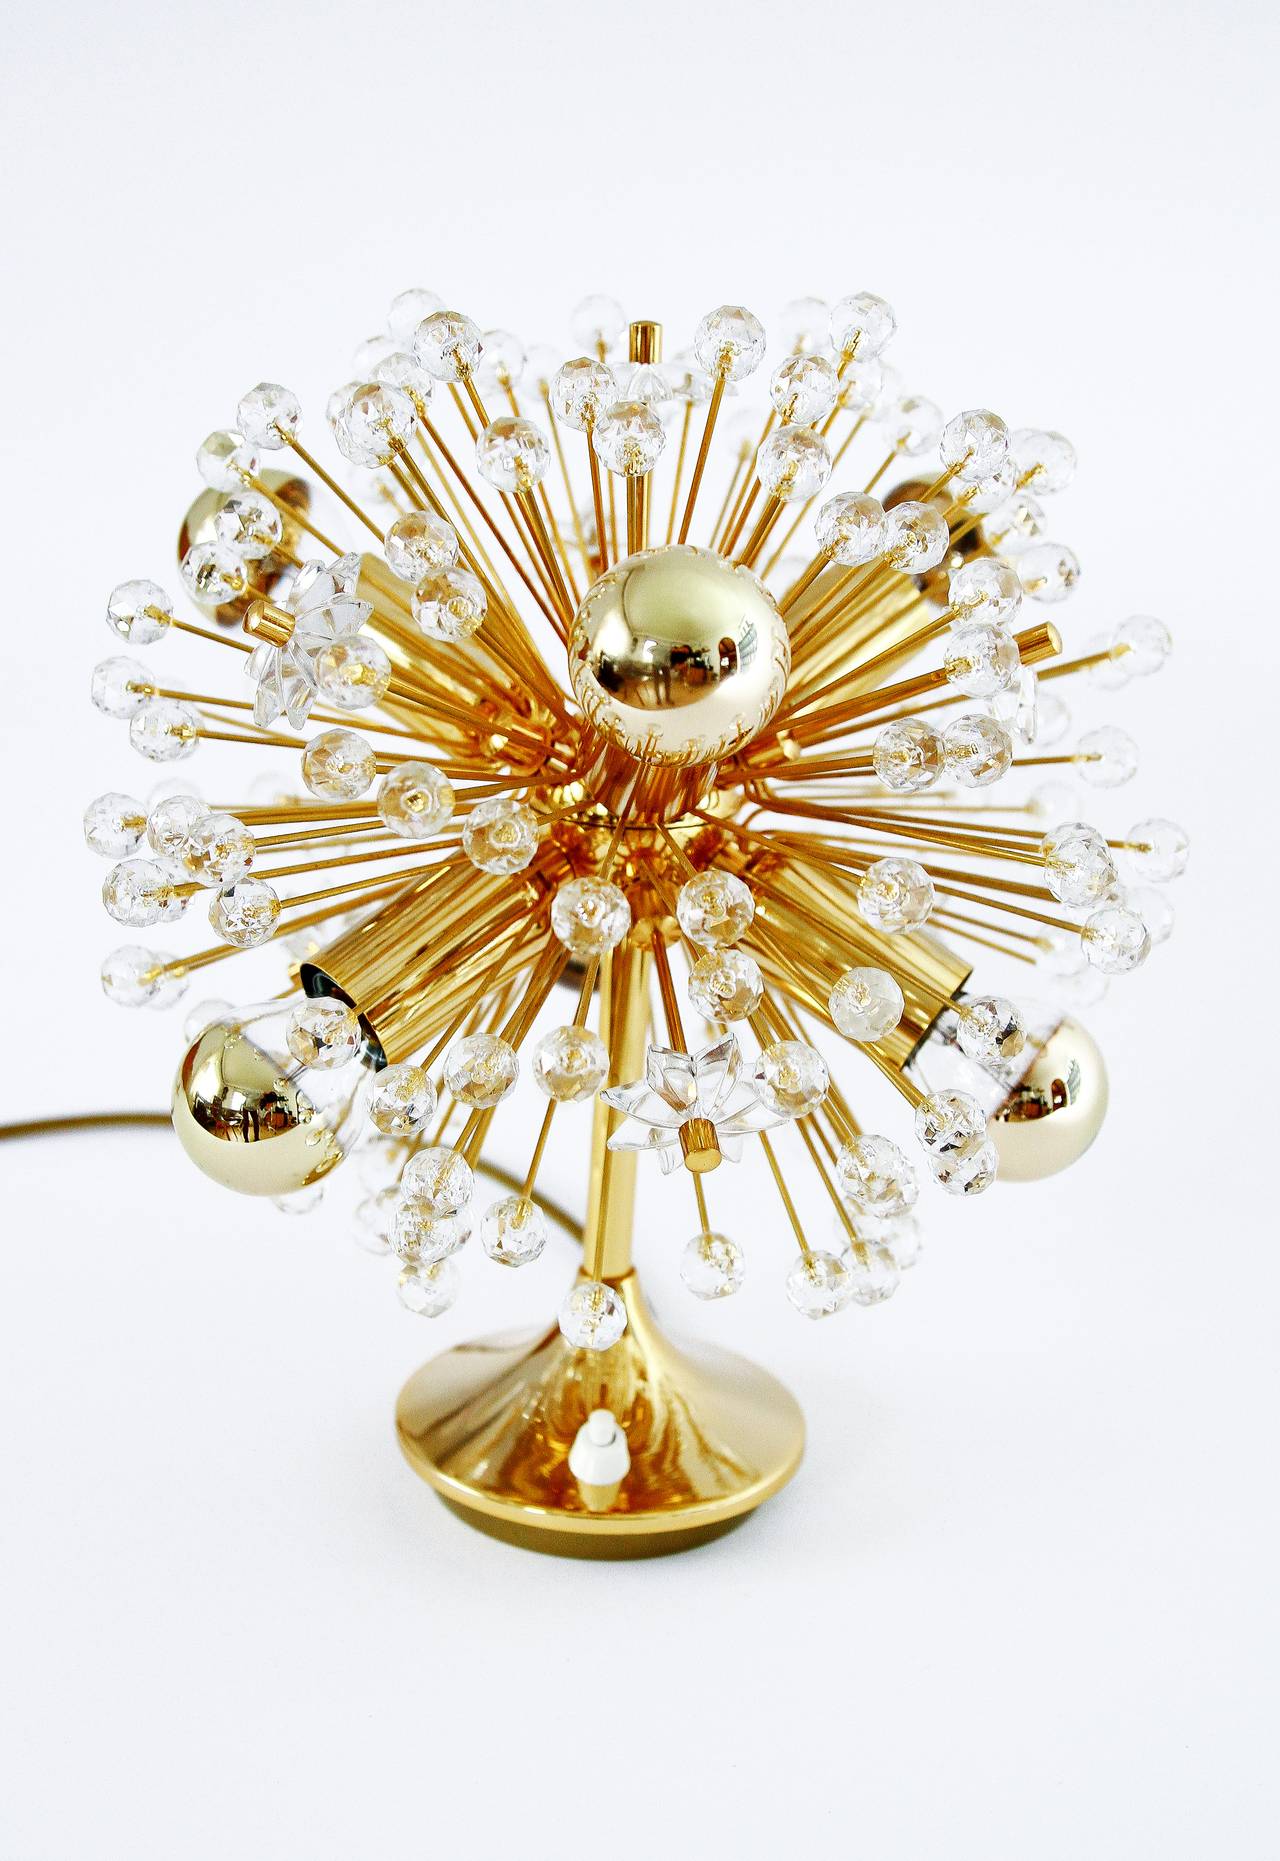 Hollywood Regency Pair of Gold-Plated Sputnik Blowball Table Desk Lamps by Emil Stejnar and Nikoll